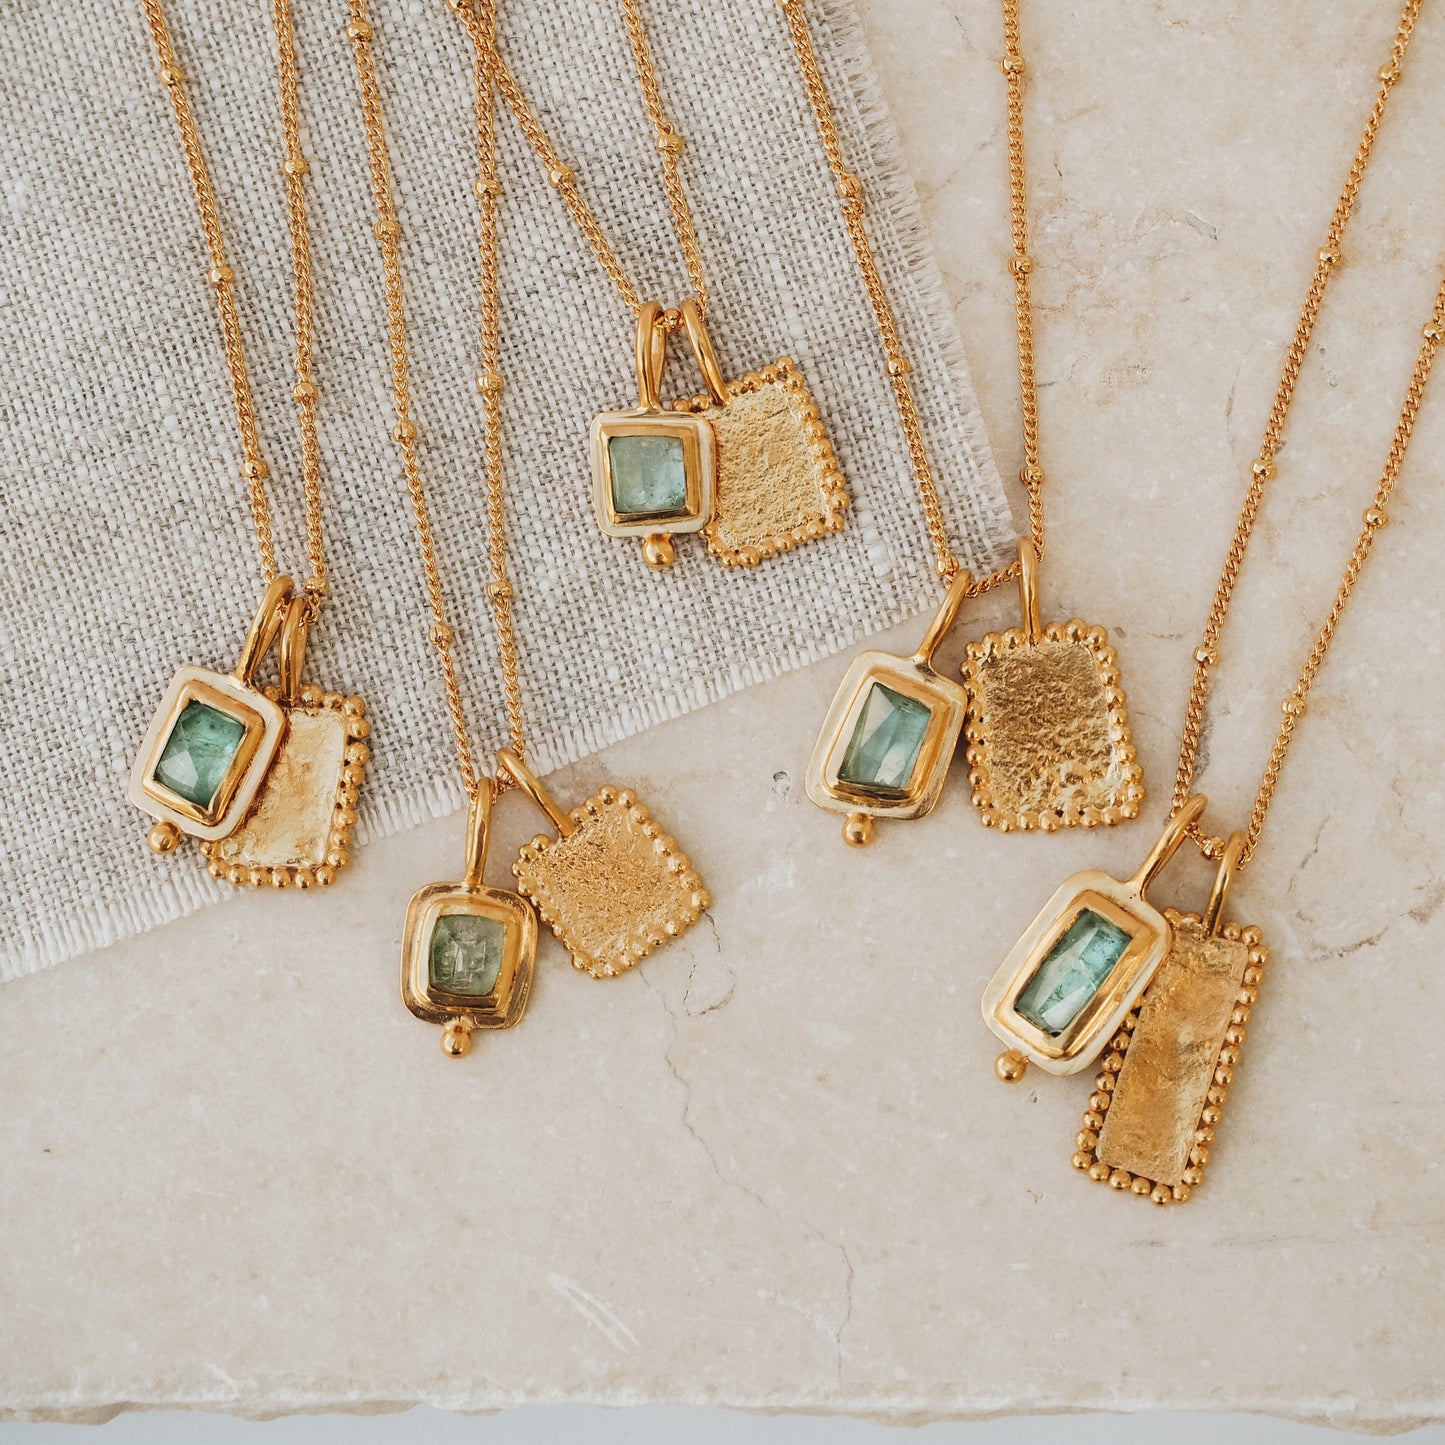 Group of elegant rich gold necklaces, featuring square pendants adorned with captivating ocean blue rose cut tourmaline gemstones, textured surfaces, and intricate granulation workmanship.